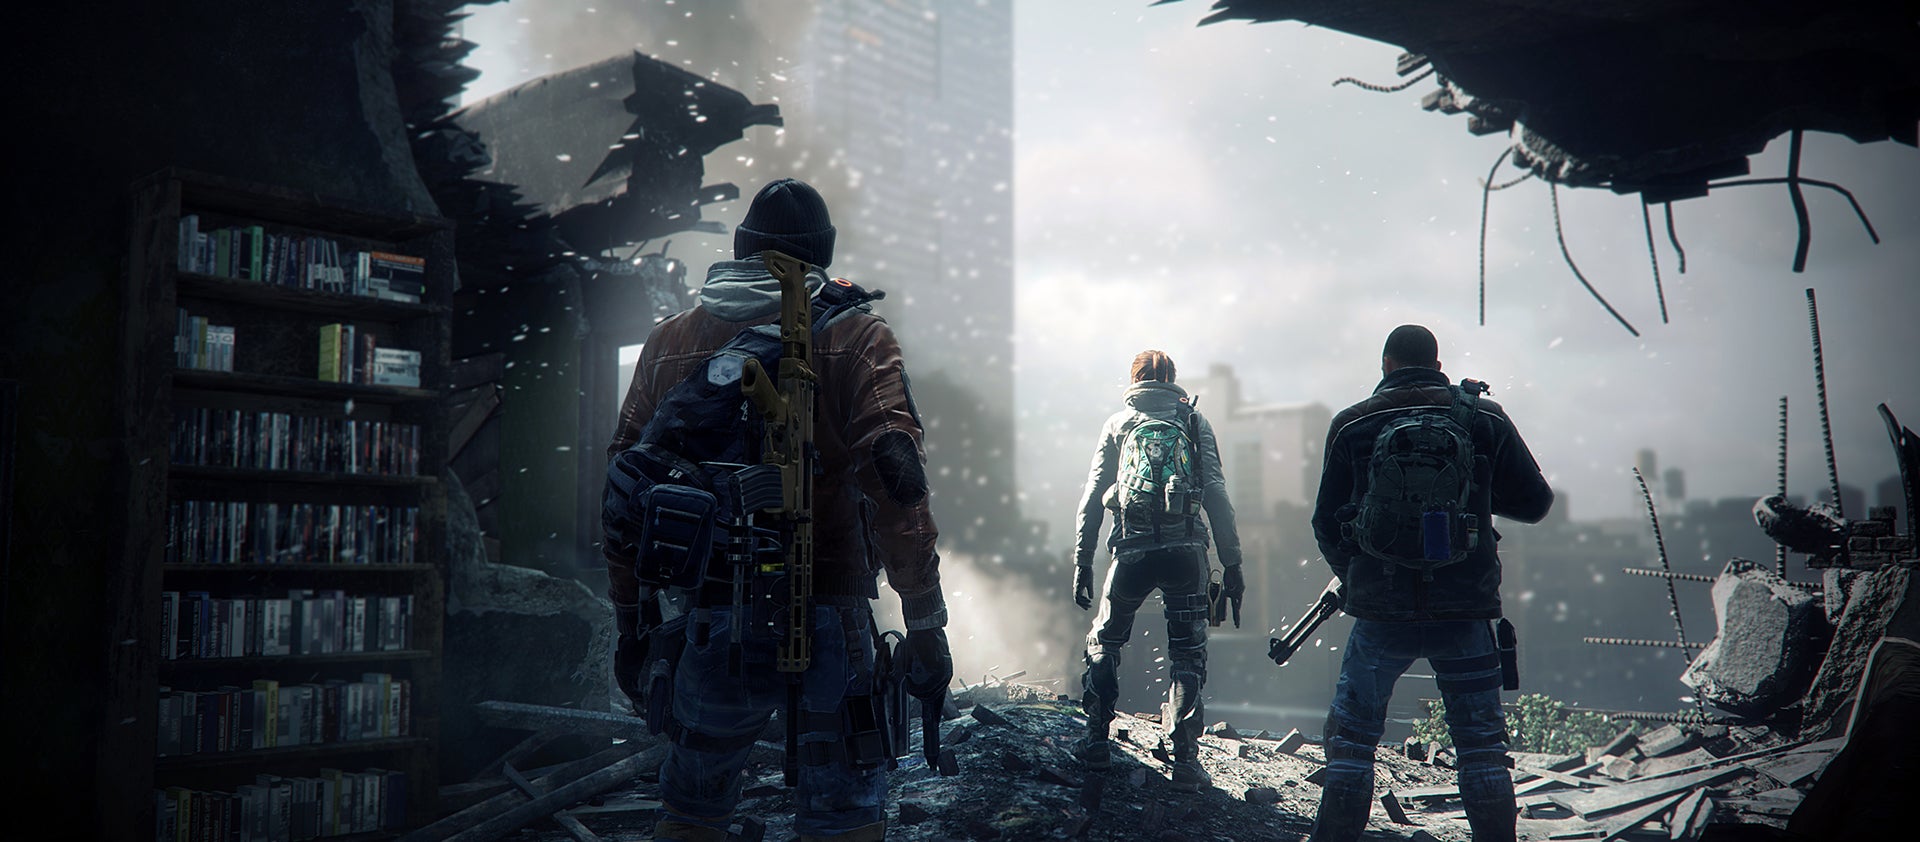 Image for The Division has 9.5M registered users, "exceeded" expectations - Ubisoft FY16